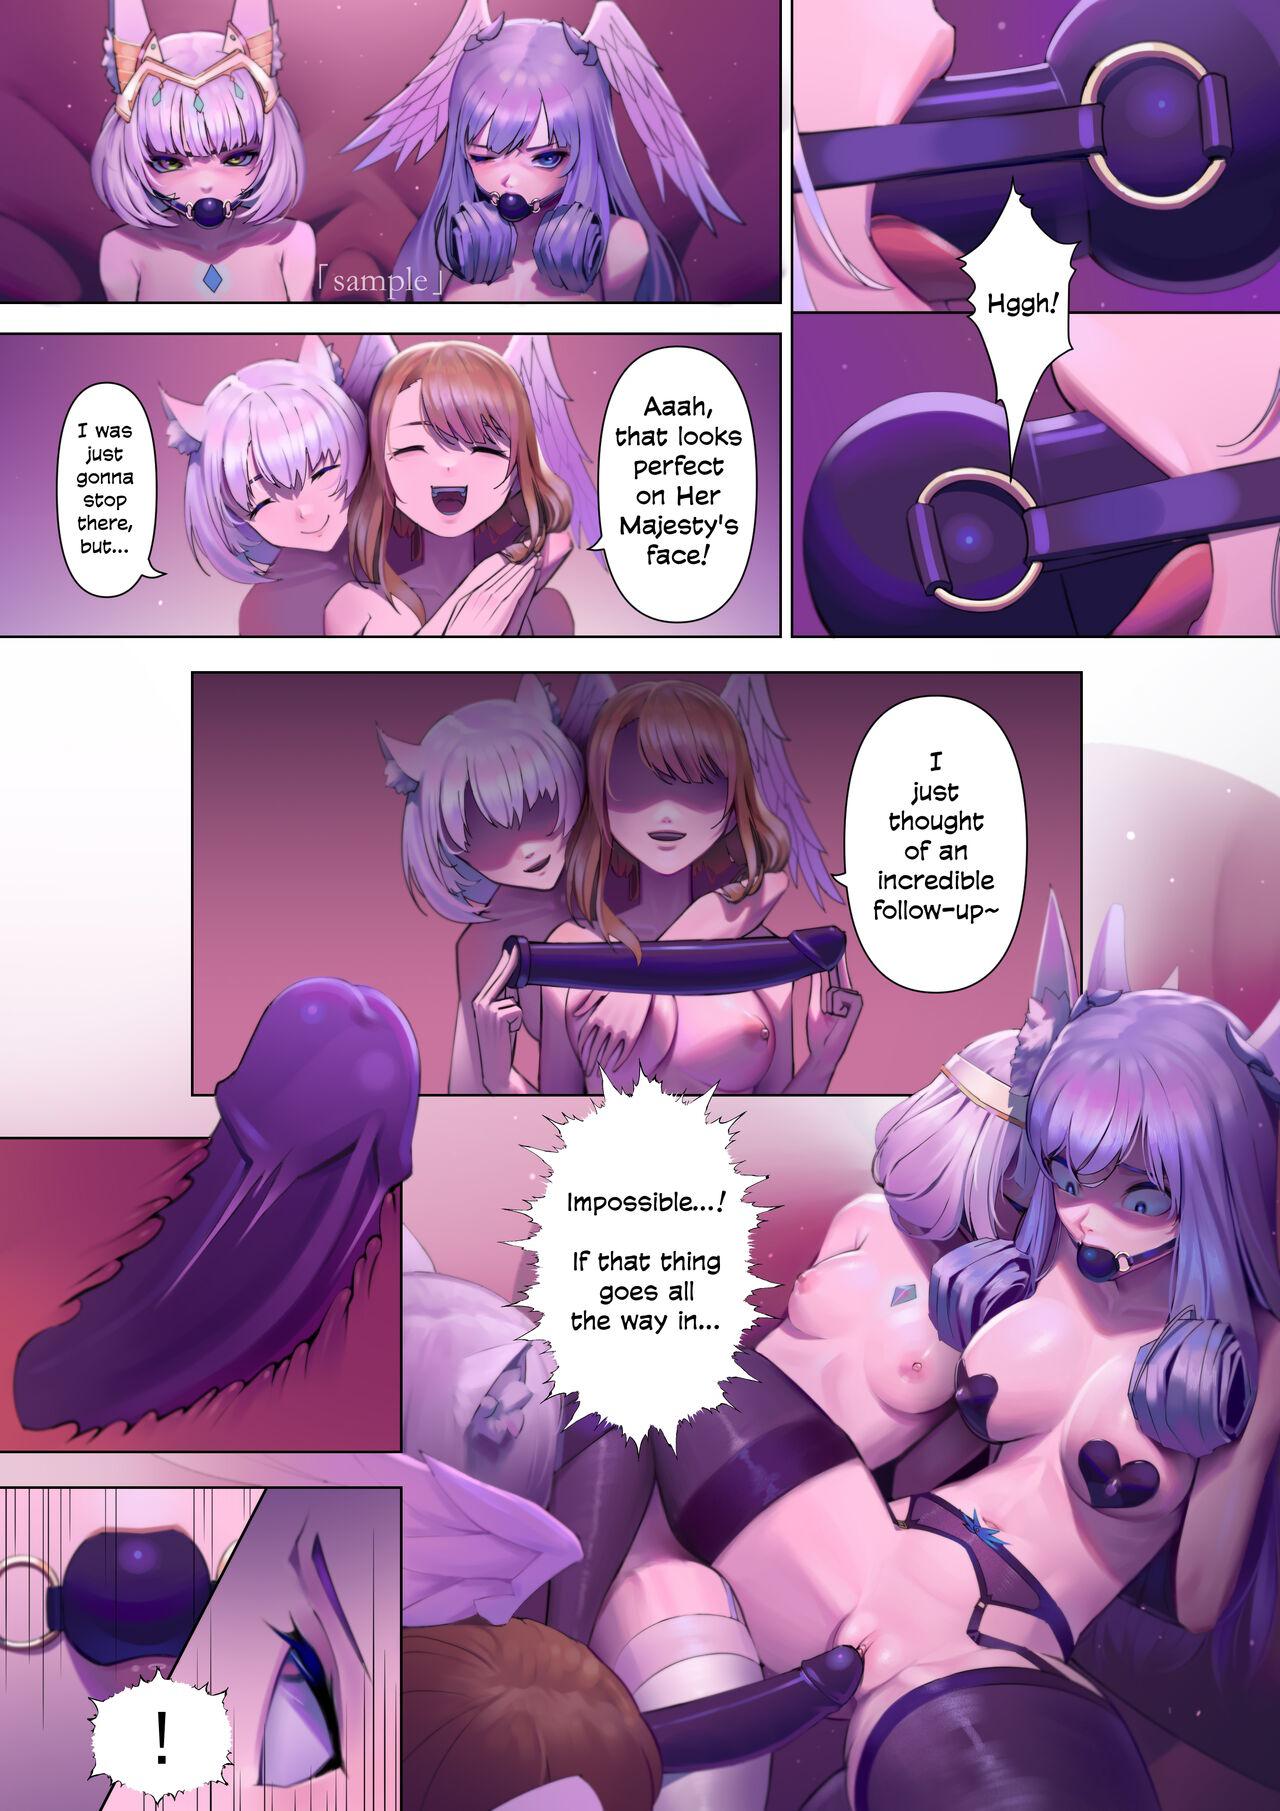 Stepmom 《Xe○blade3》Doujinshi Request - Xenoblade chronicles 3 Chilena - Page 9